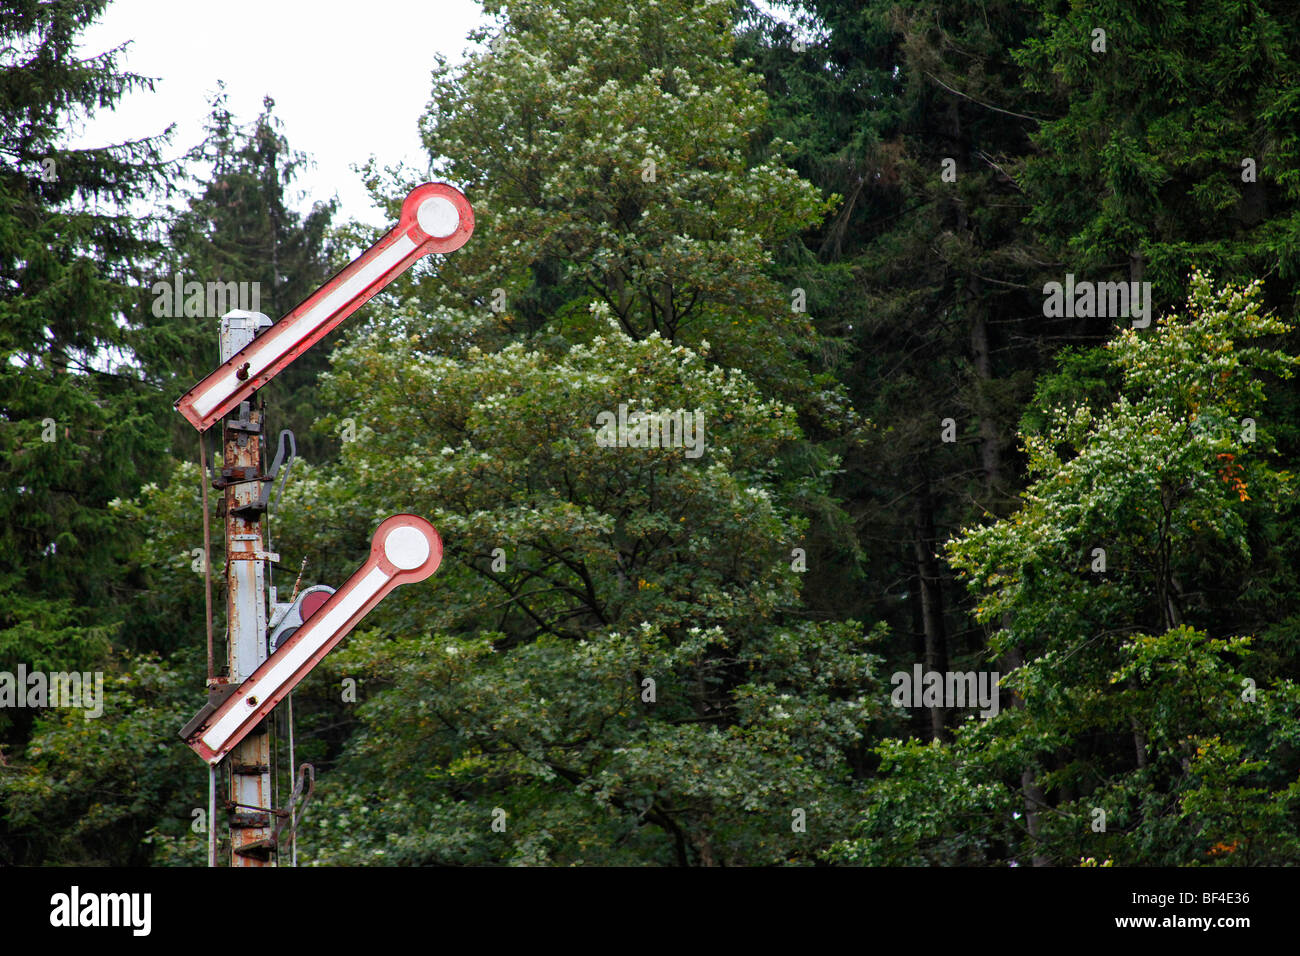 An open railway signal in Oberhof, Thuringia, Germany, Europe Stock Photo